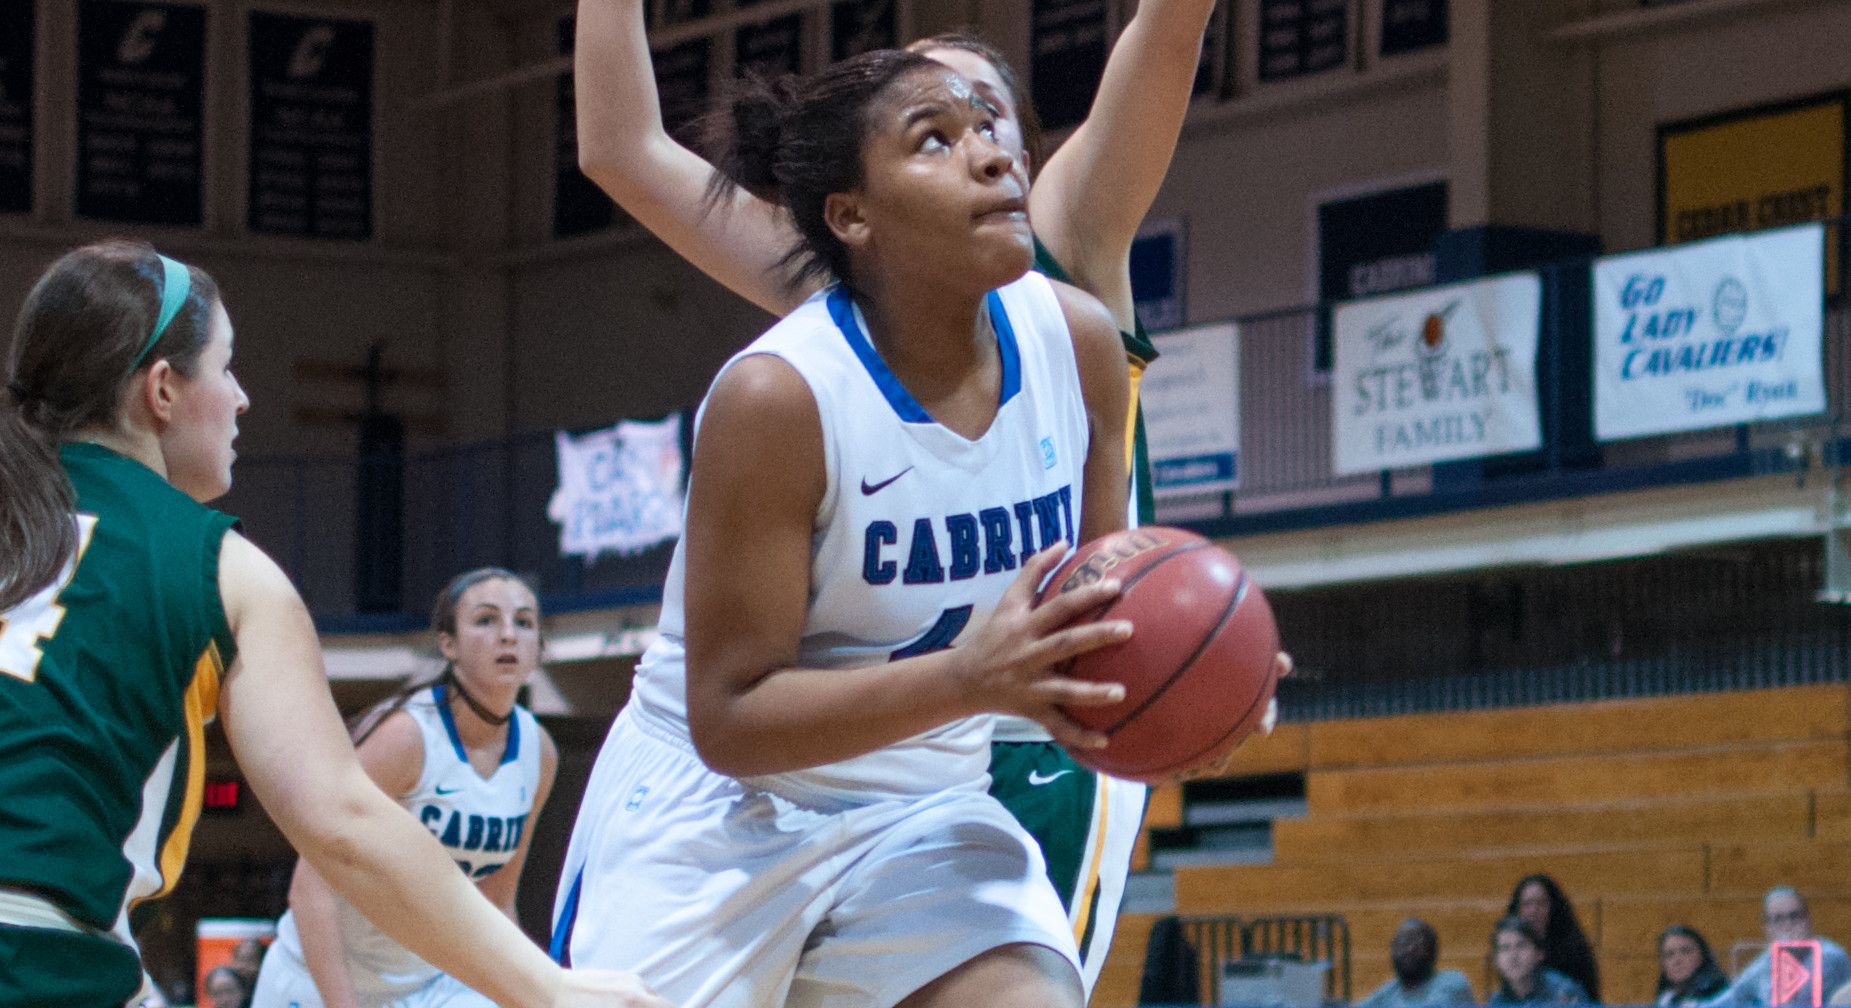 Amber Keys was one point shy of her career-high 20 points in the Cavs loss against Marywood. (Dan Luner/Photo Editor)